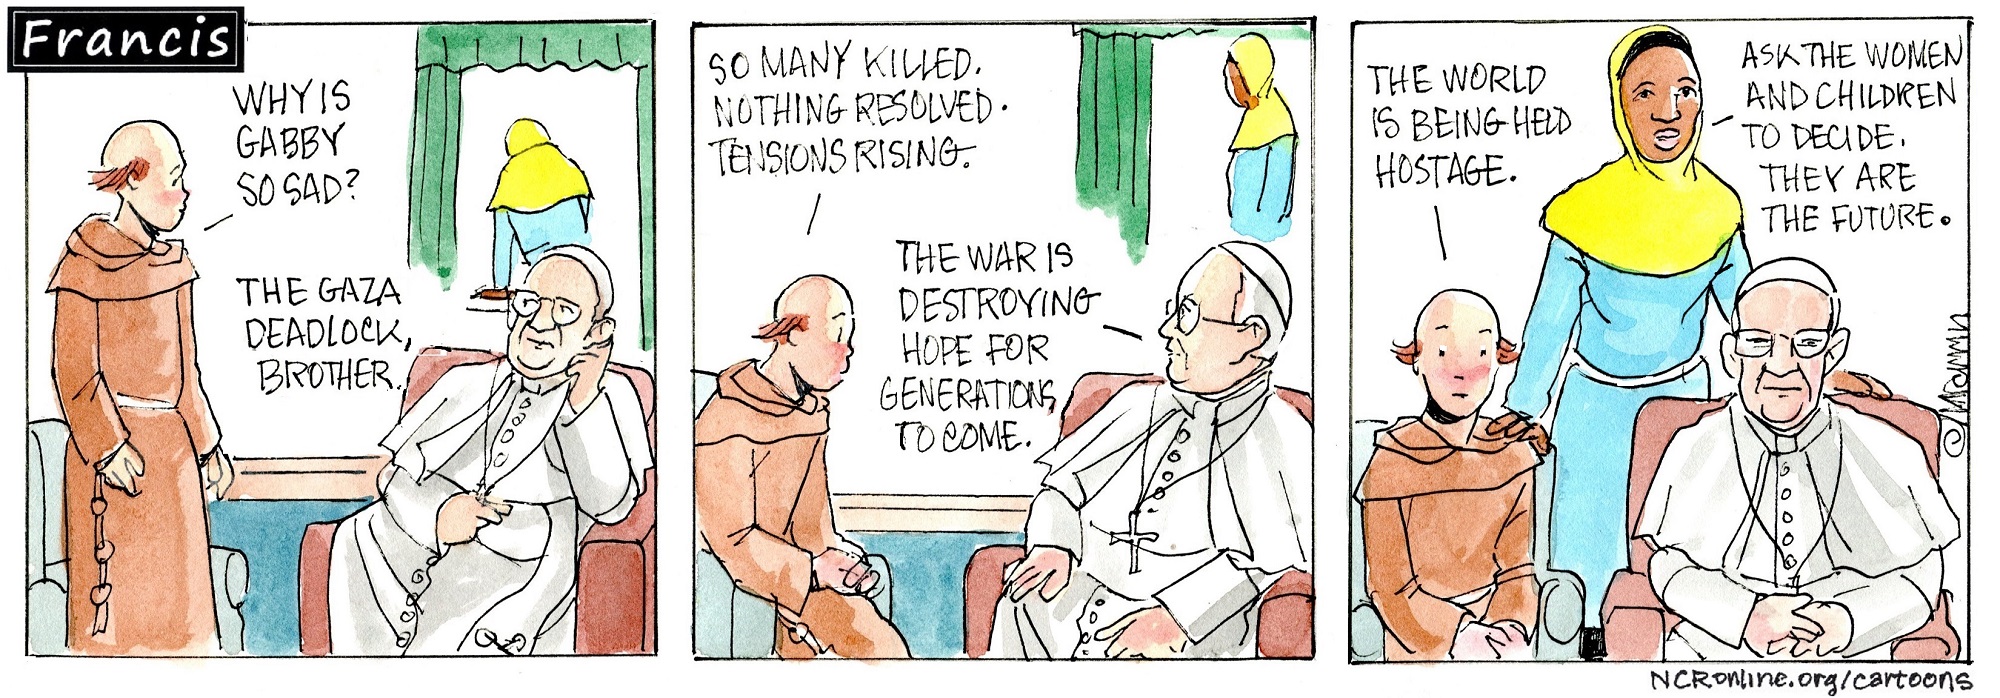 Francis, the comic strip: Brother Leo and Francis discuss the tension in Gaza.